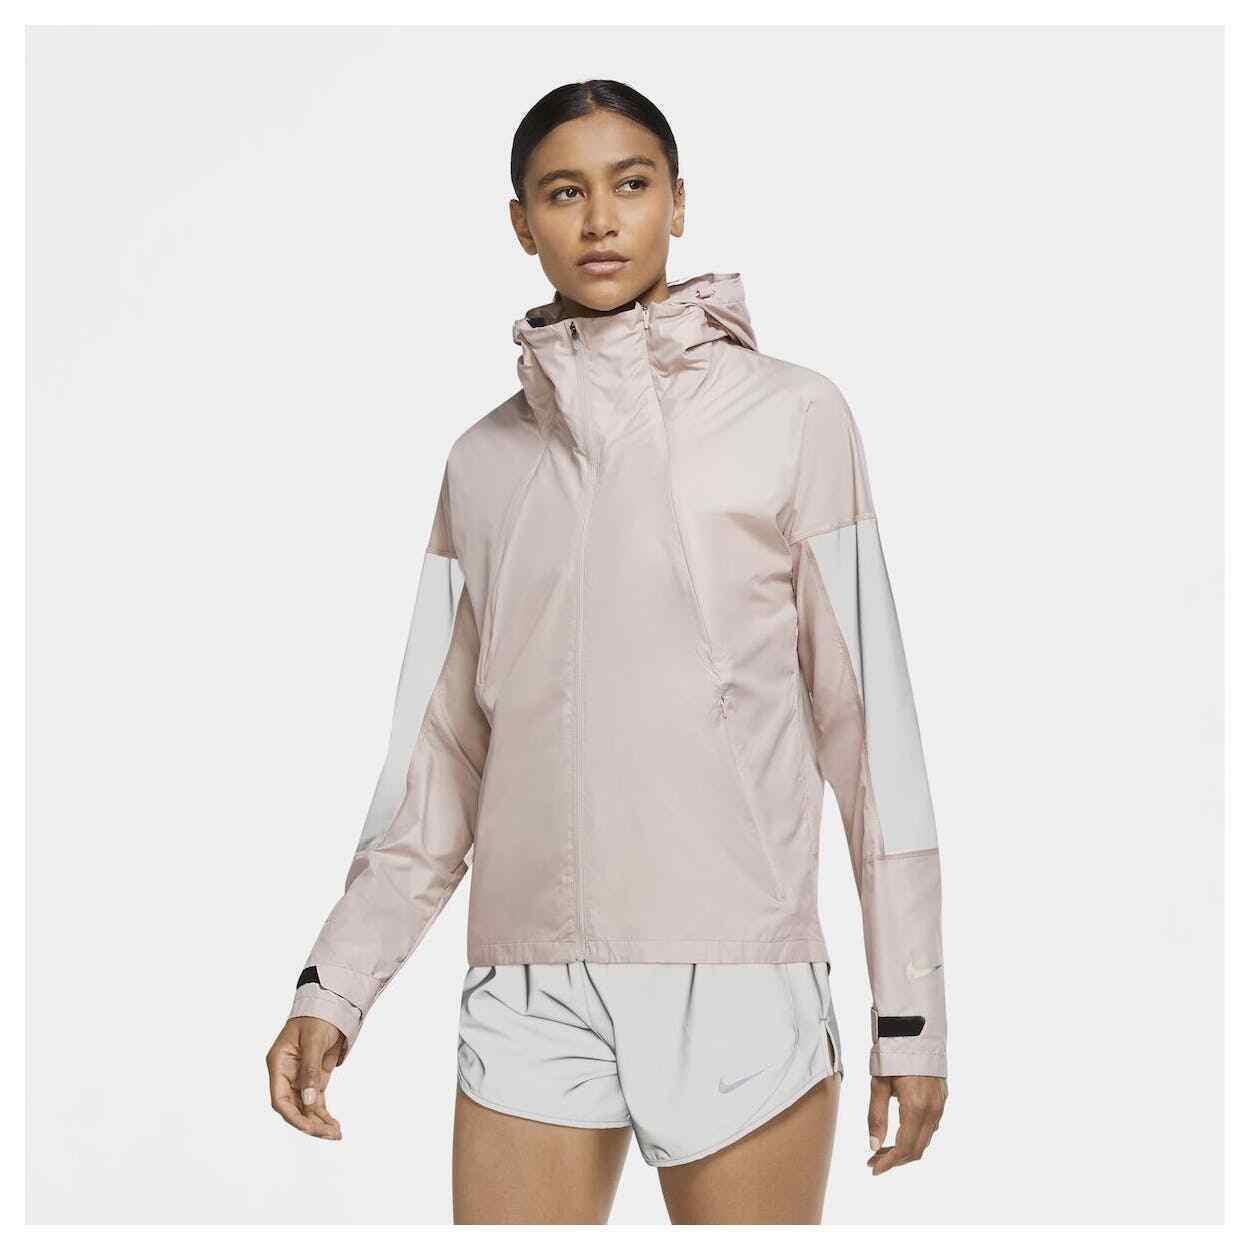 CU3383-269 Women Nike Run Division Flash Jacket - rose gold with reflective silver